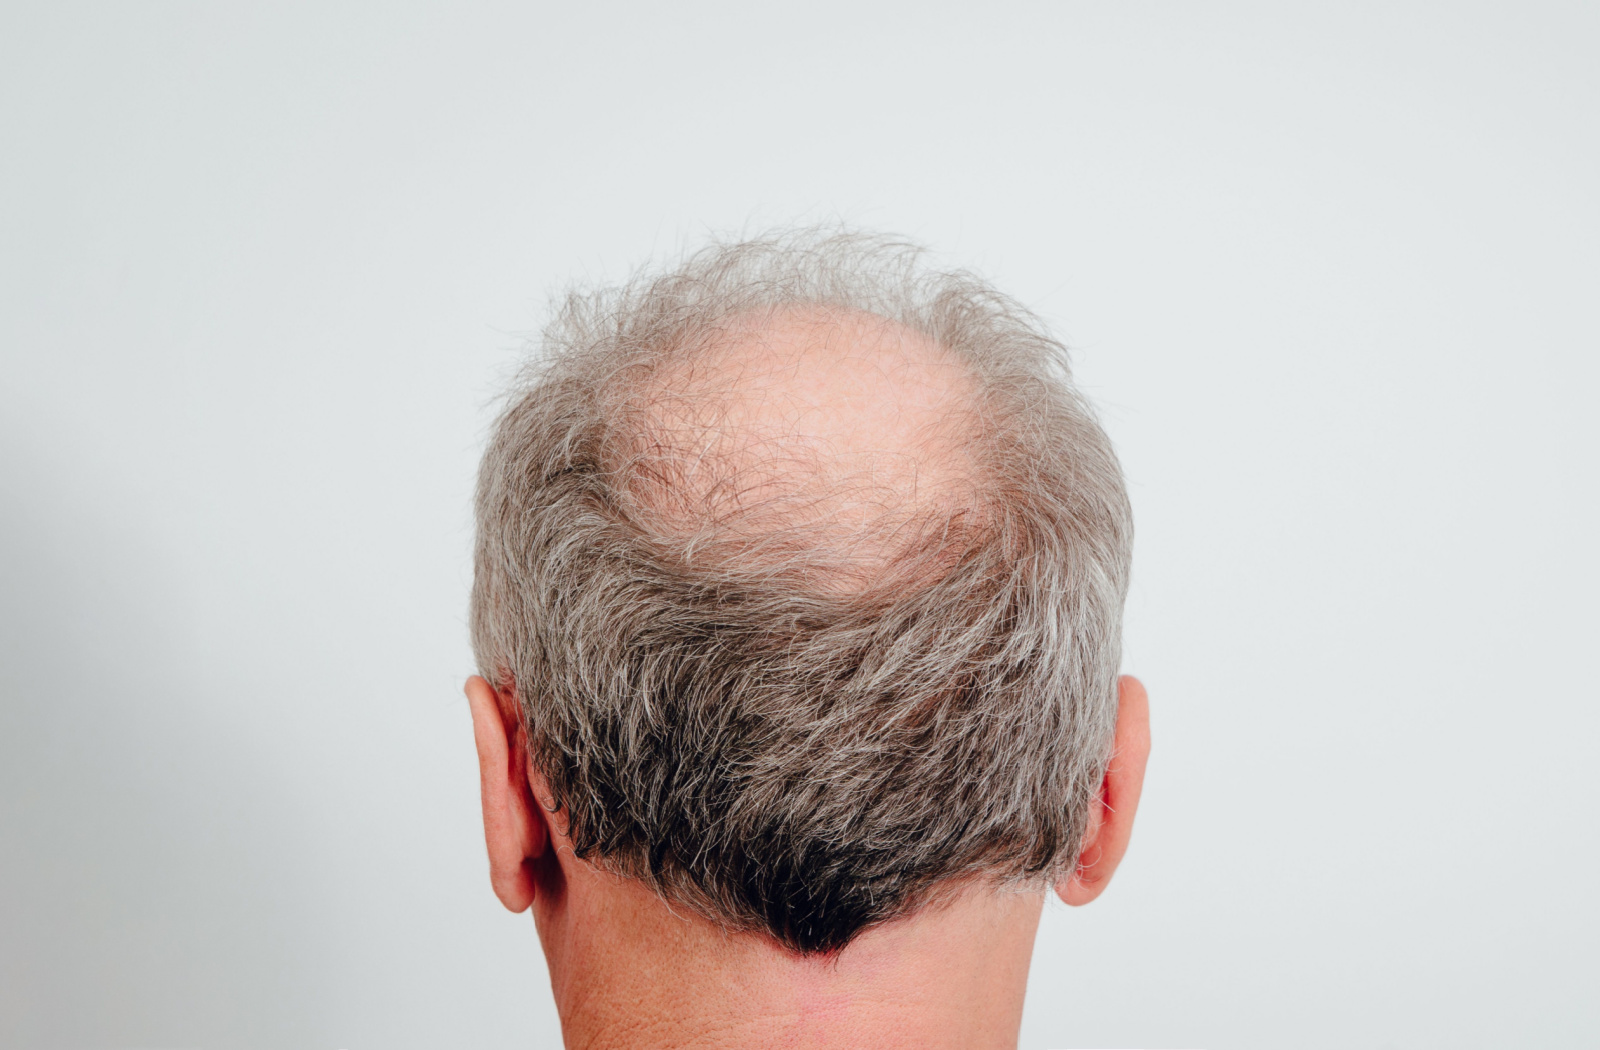 A rear view of an elderly man's head shows massive hair loss due to low level of testosterone.